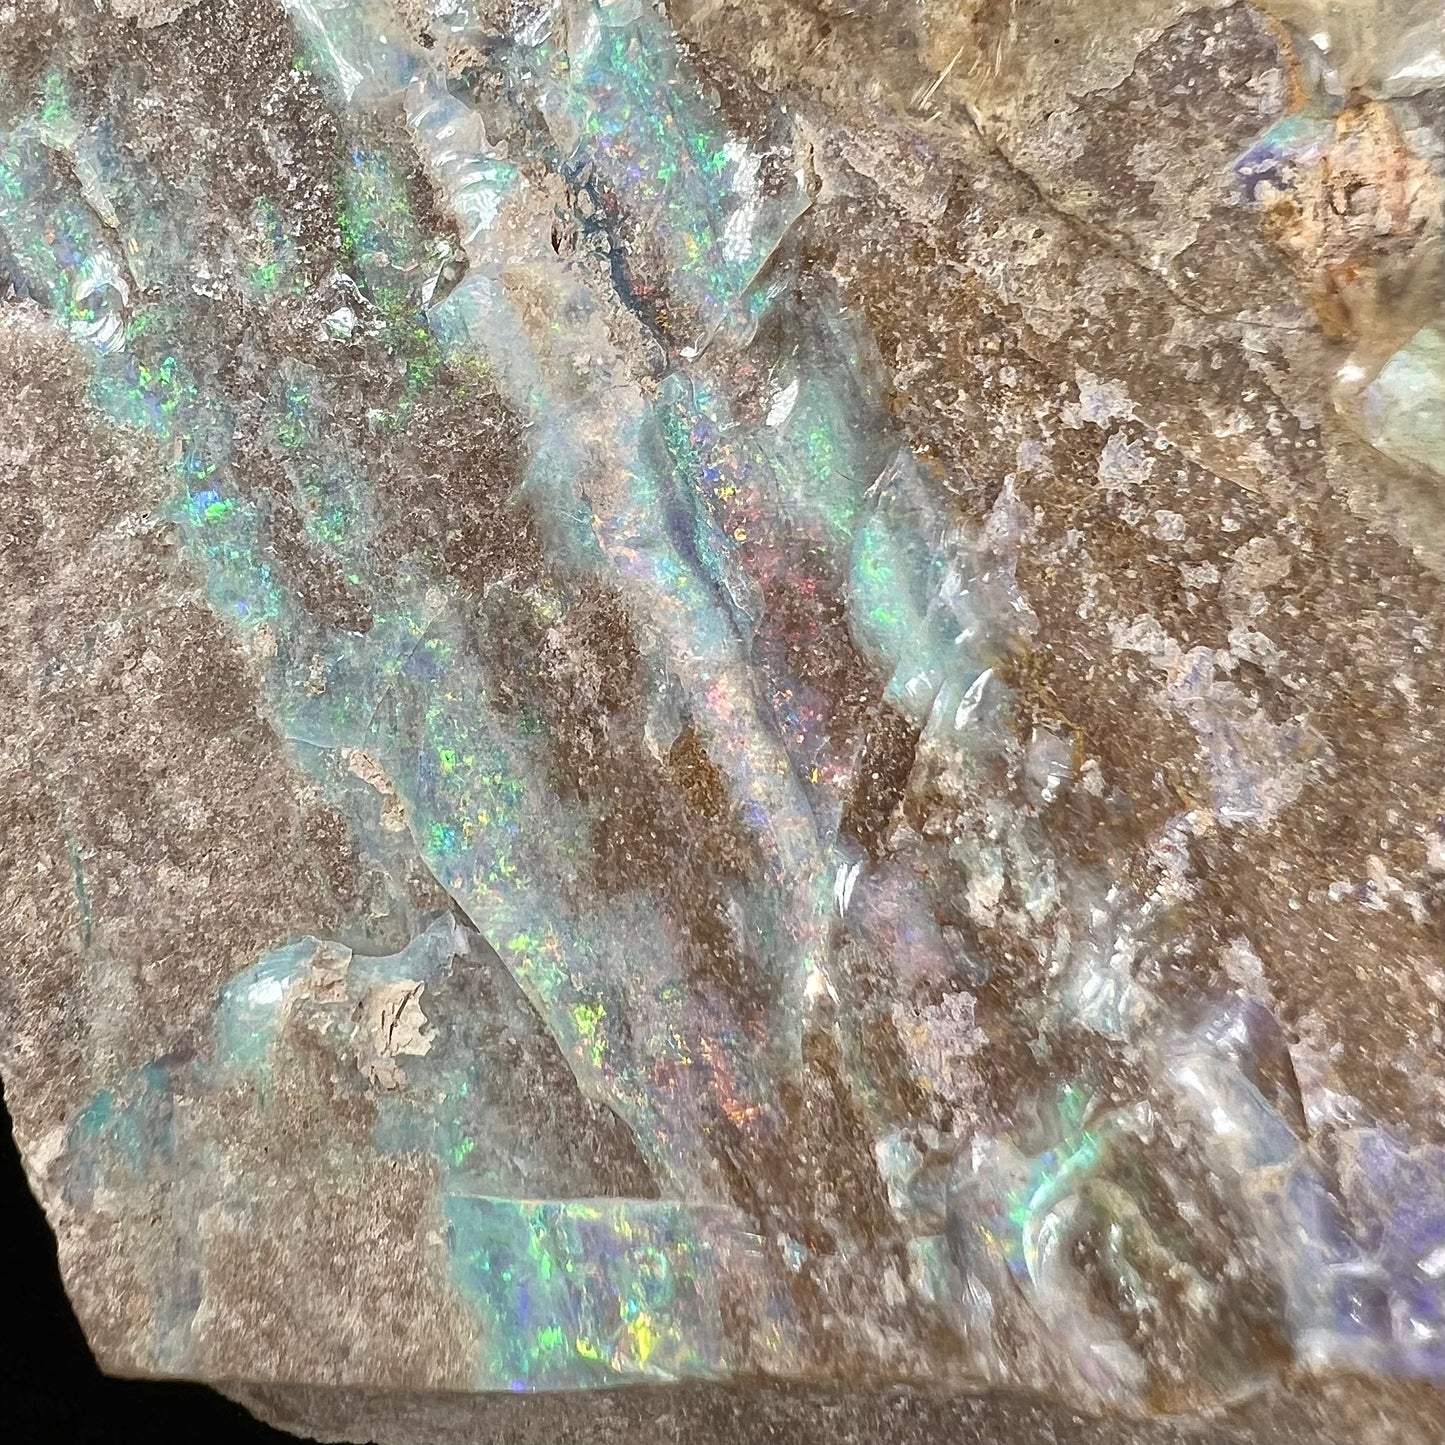 A rough Painted Lady boulder opal specimen that shows blue, green, and pinkish red colors.